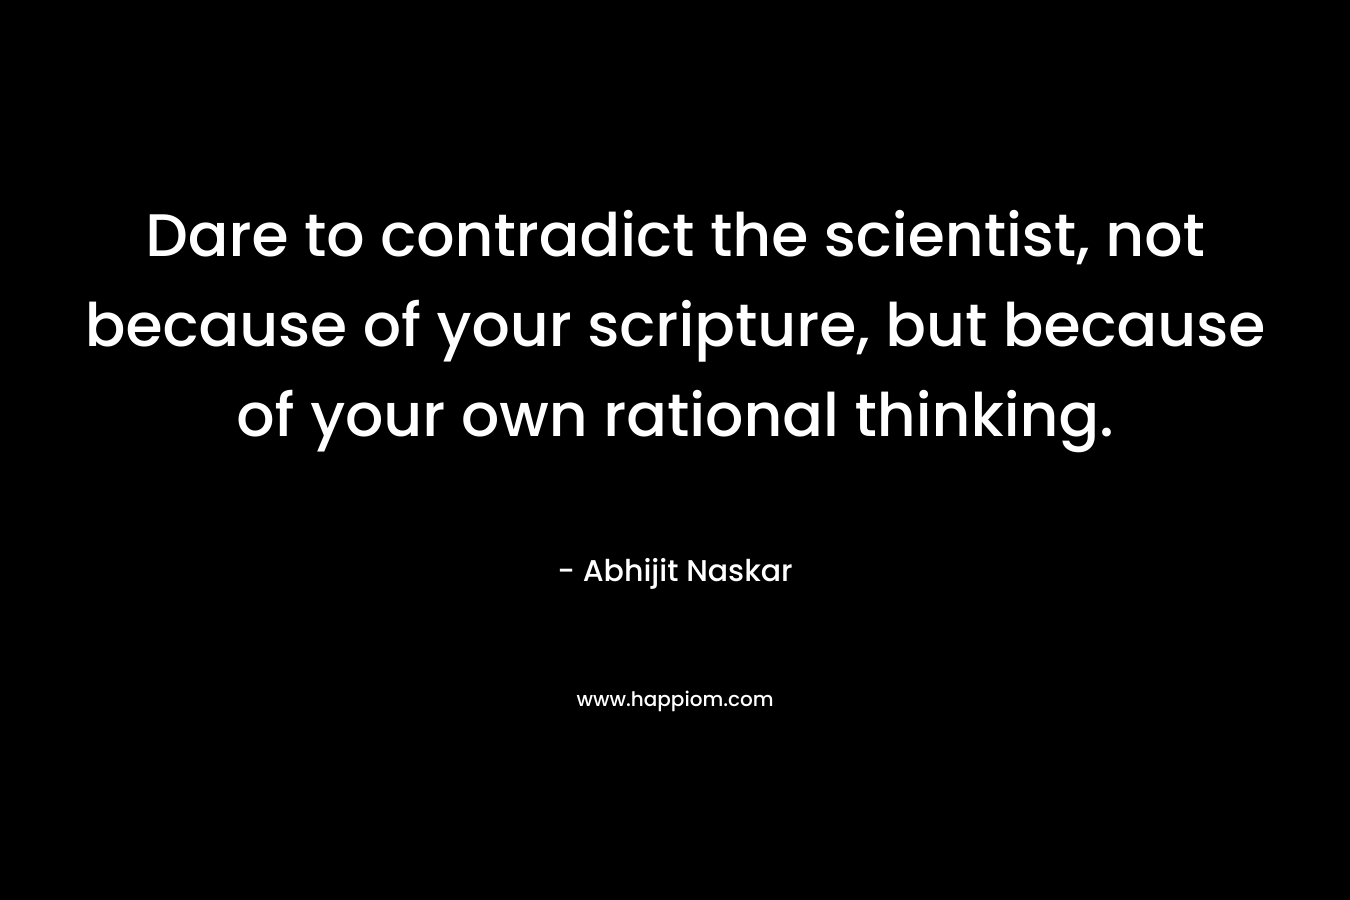 Dare to contradict the scientist, not because of your scripture, but because of your own rational thinking.